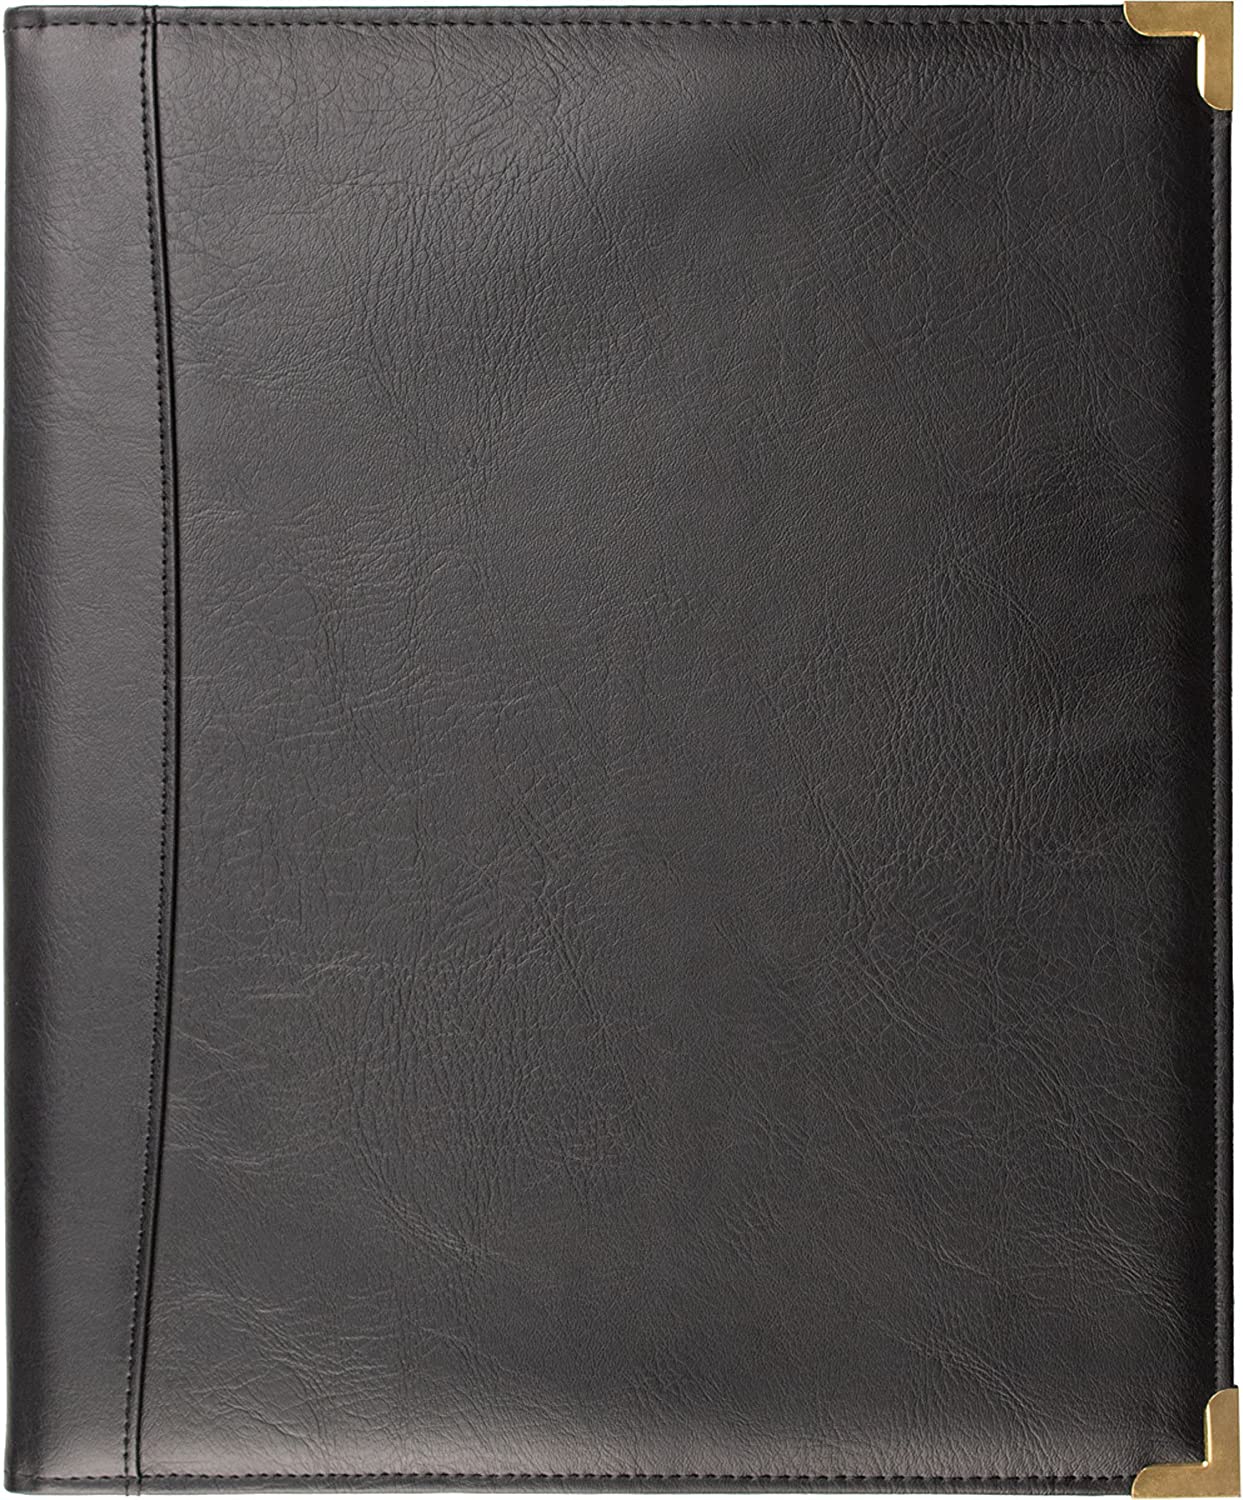 New Product! (MSP-240) 11.5" x 13.75" -Large Sheet Music Folder with Double Elastic Straps Closures for Instrument Player